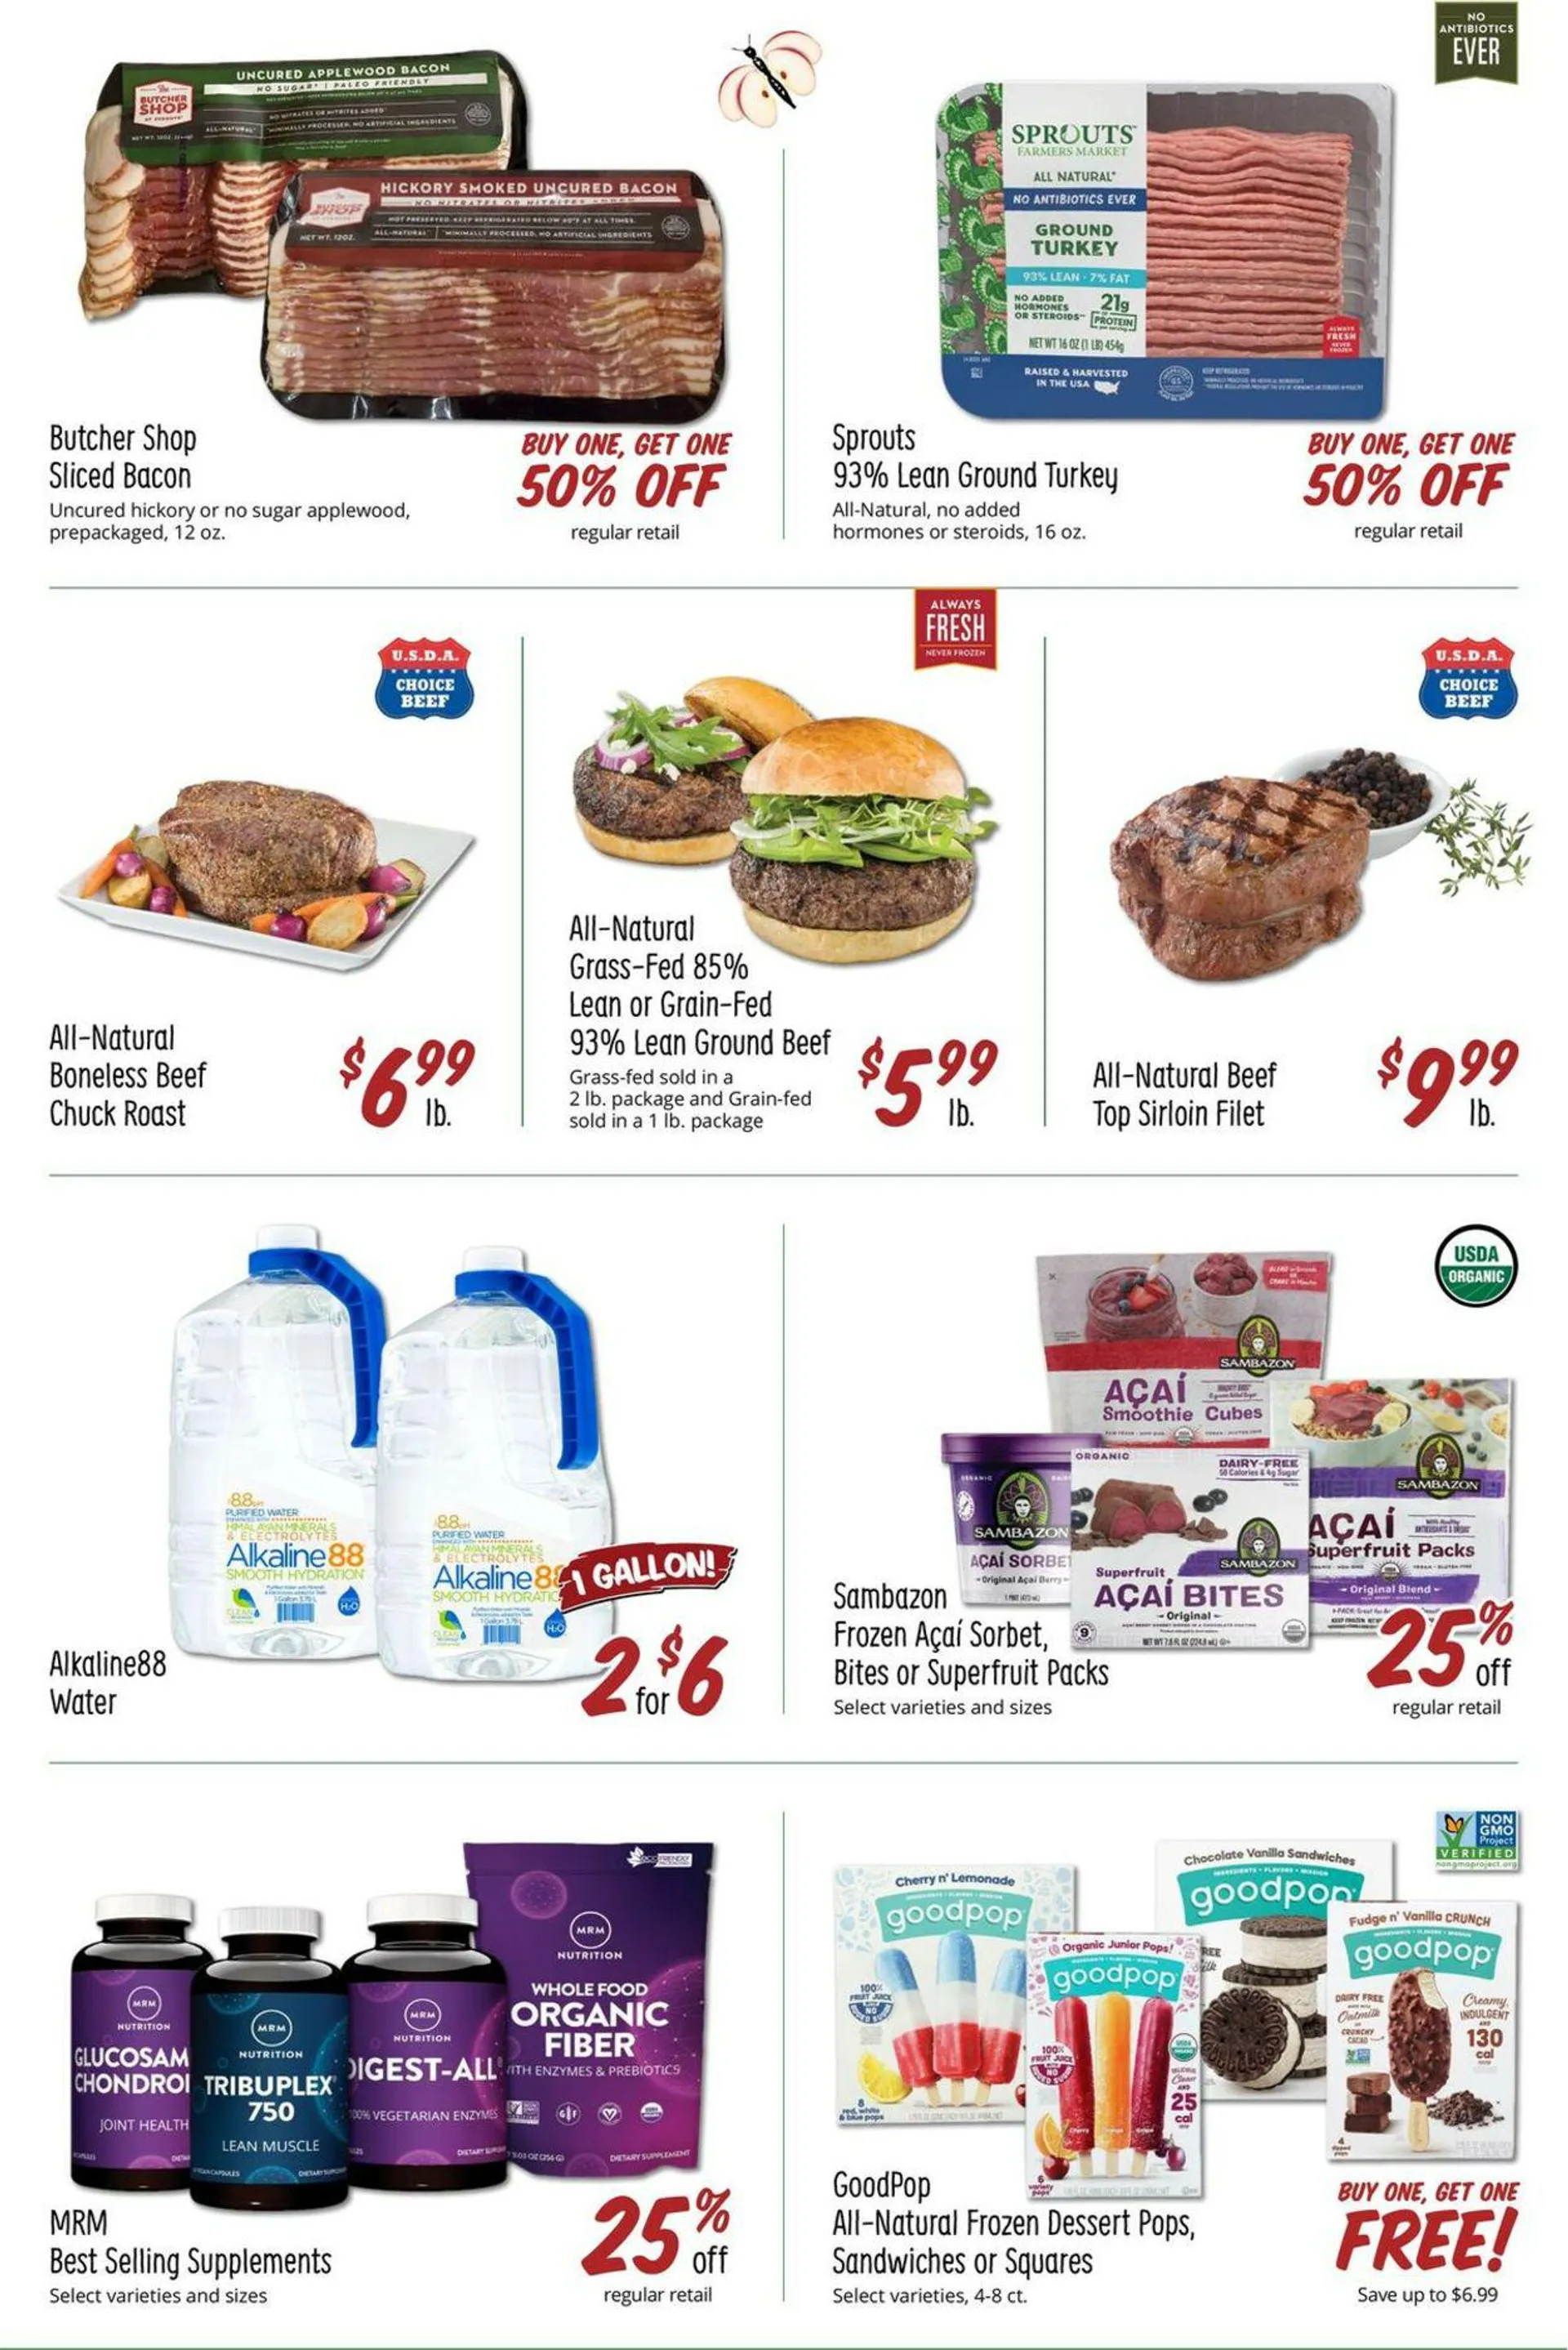 Sprouts Current weekly ad - 2